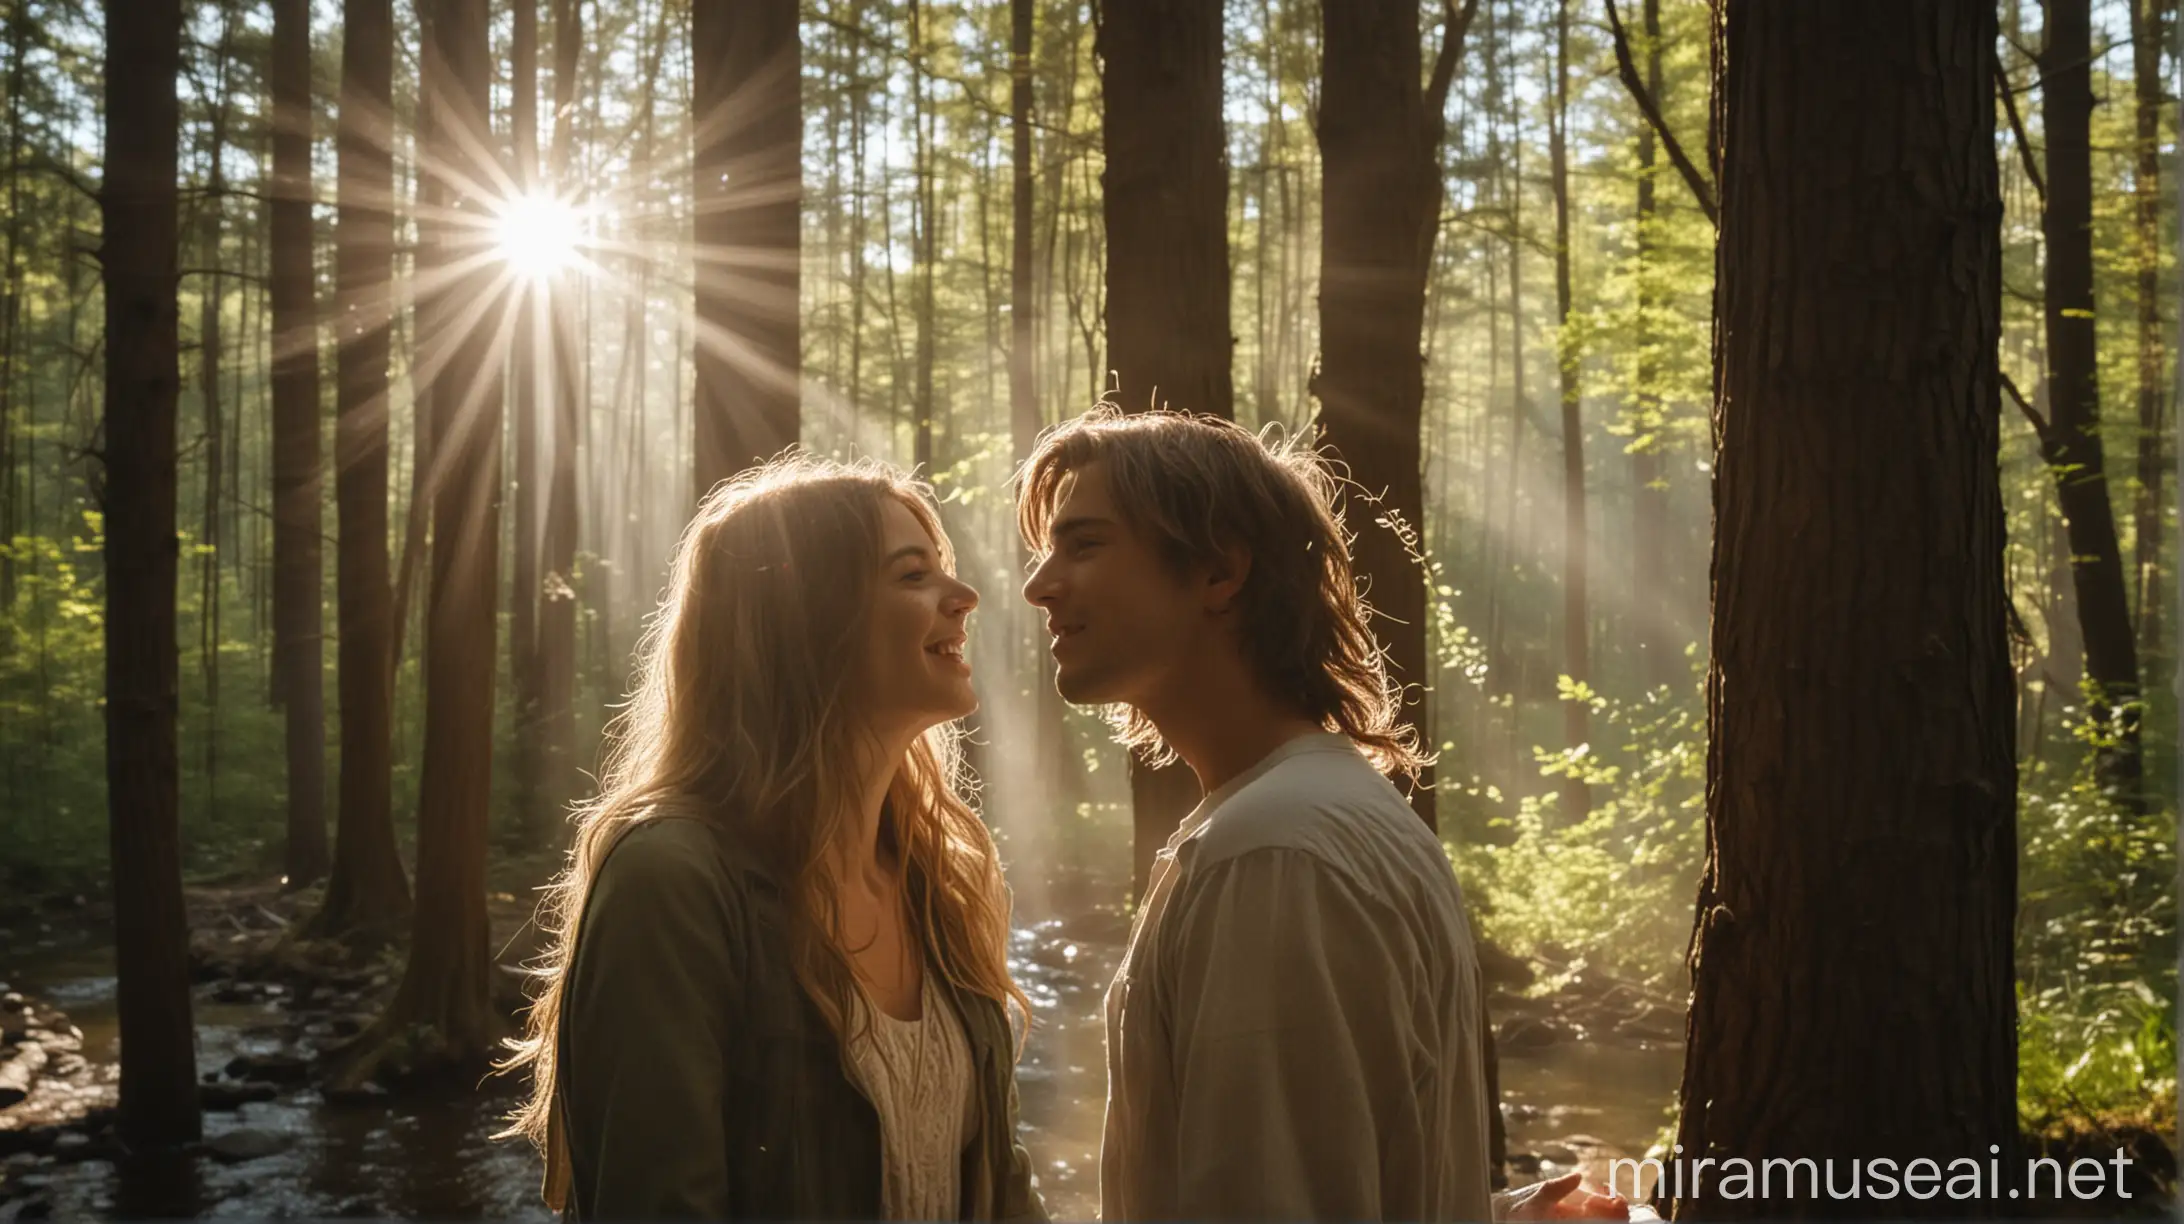 Romantic Couple in Dense Forest with Sunbeam and River